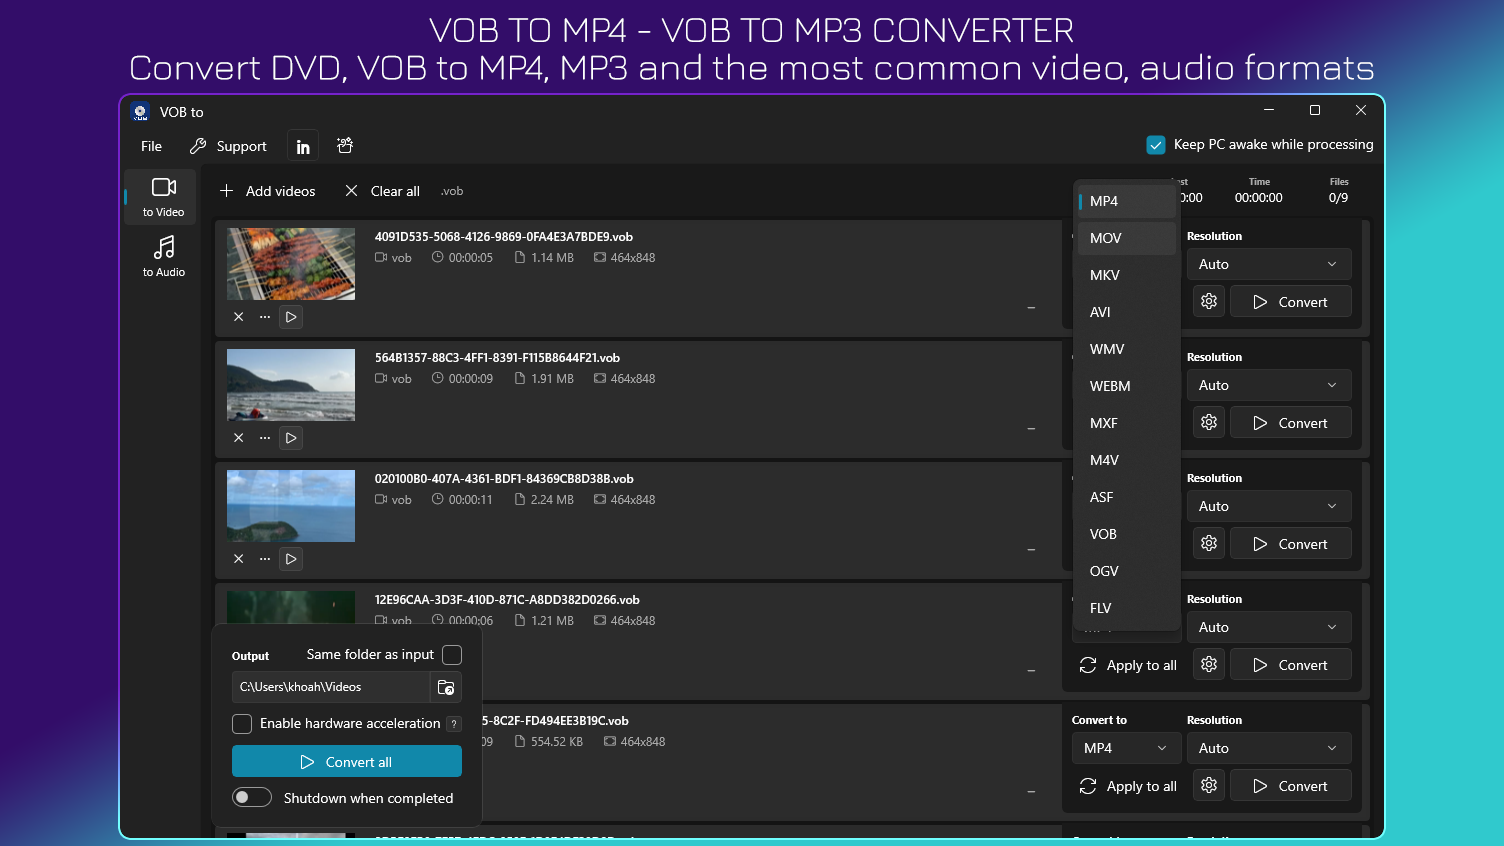 VOB to MP4 - VOB to MP3 Converter - Convert DVD, VOB to MP4, MP3 and the most common video, audio formats